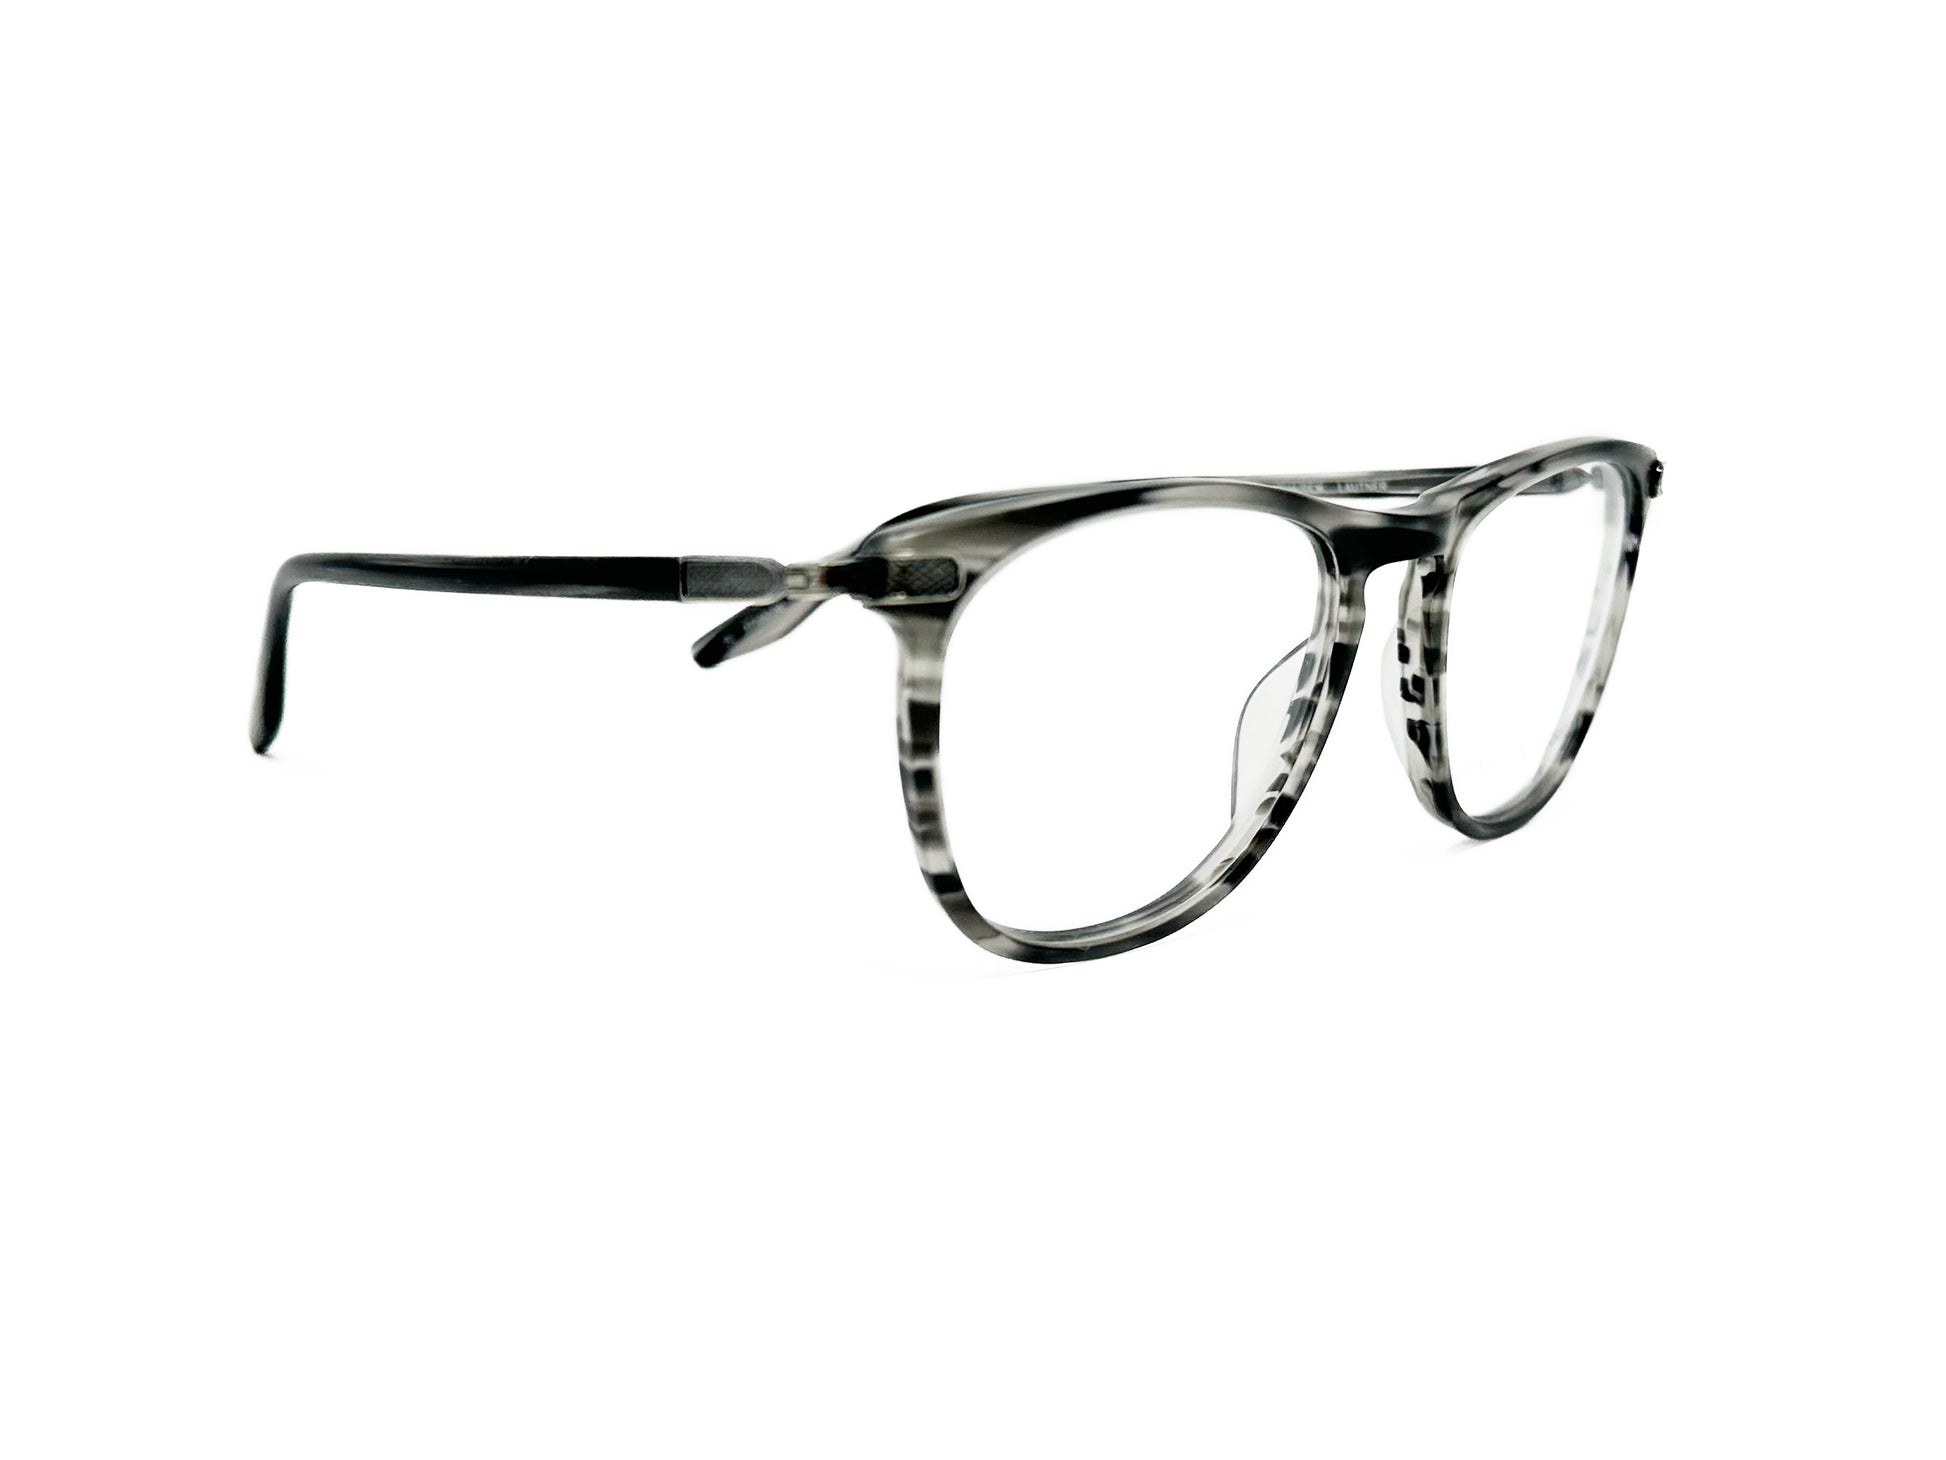 Barton Perreira square acetate optical frame. Model: Lautner. Color: MGM/PEW - Grey and black stripes. Side view.